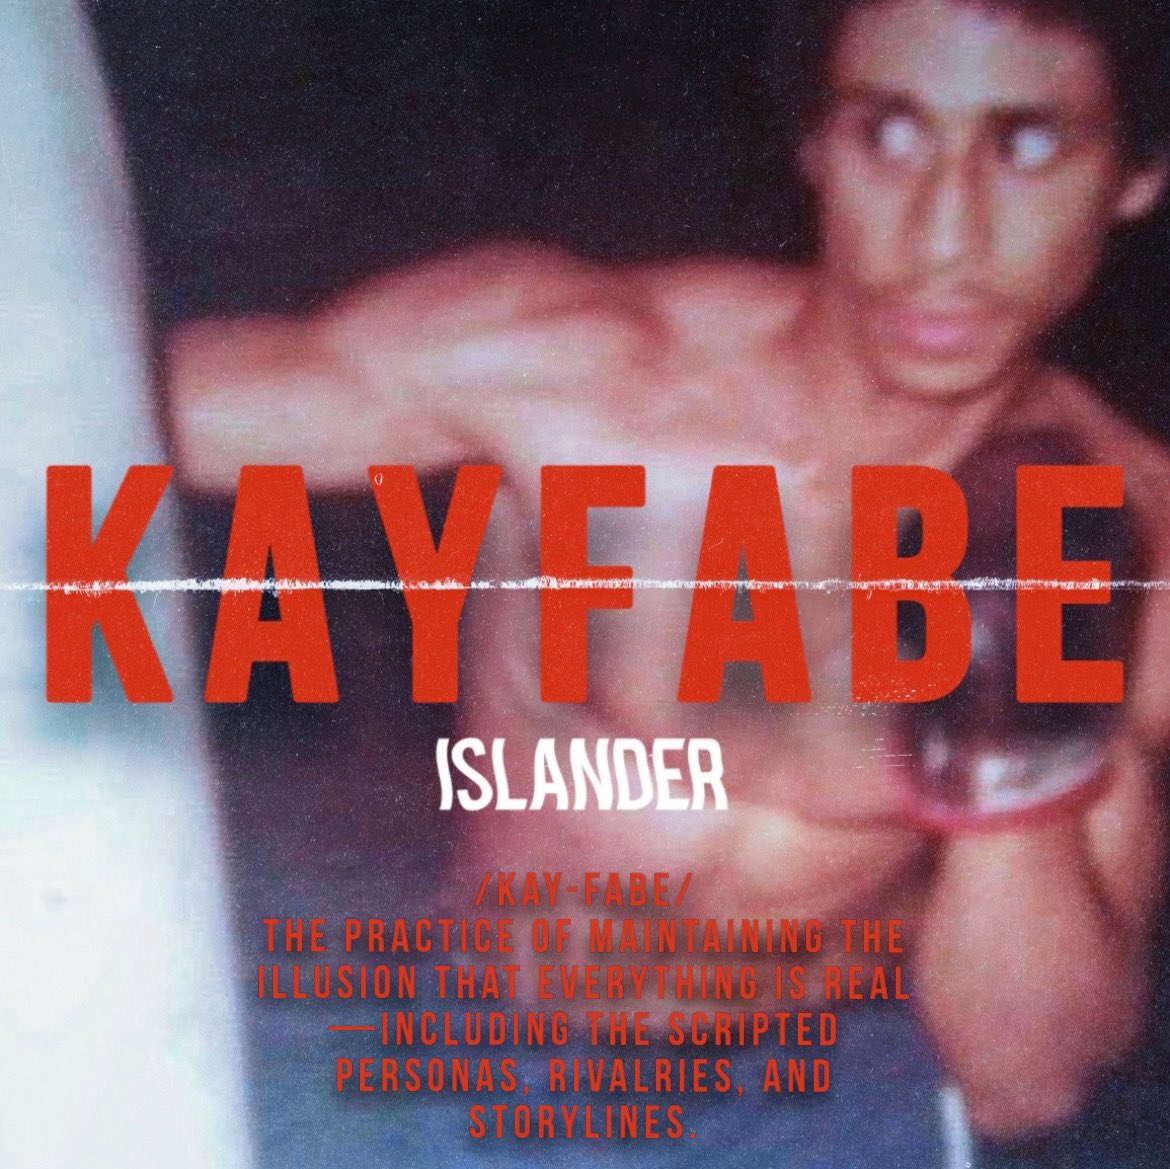 The word “Kayfabe” is trending, so here is our song “Kayfabe” m.youtube.com/watch?v=13O7kX… #Kayfabe